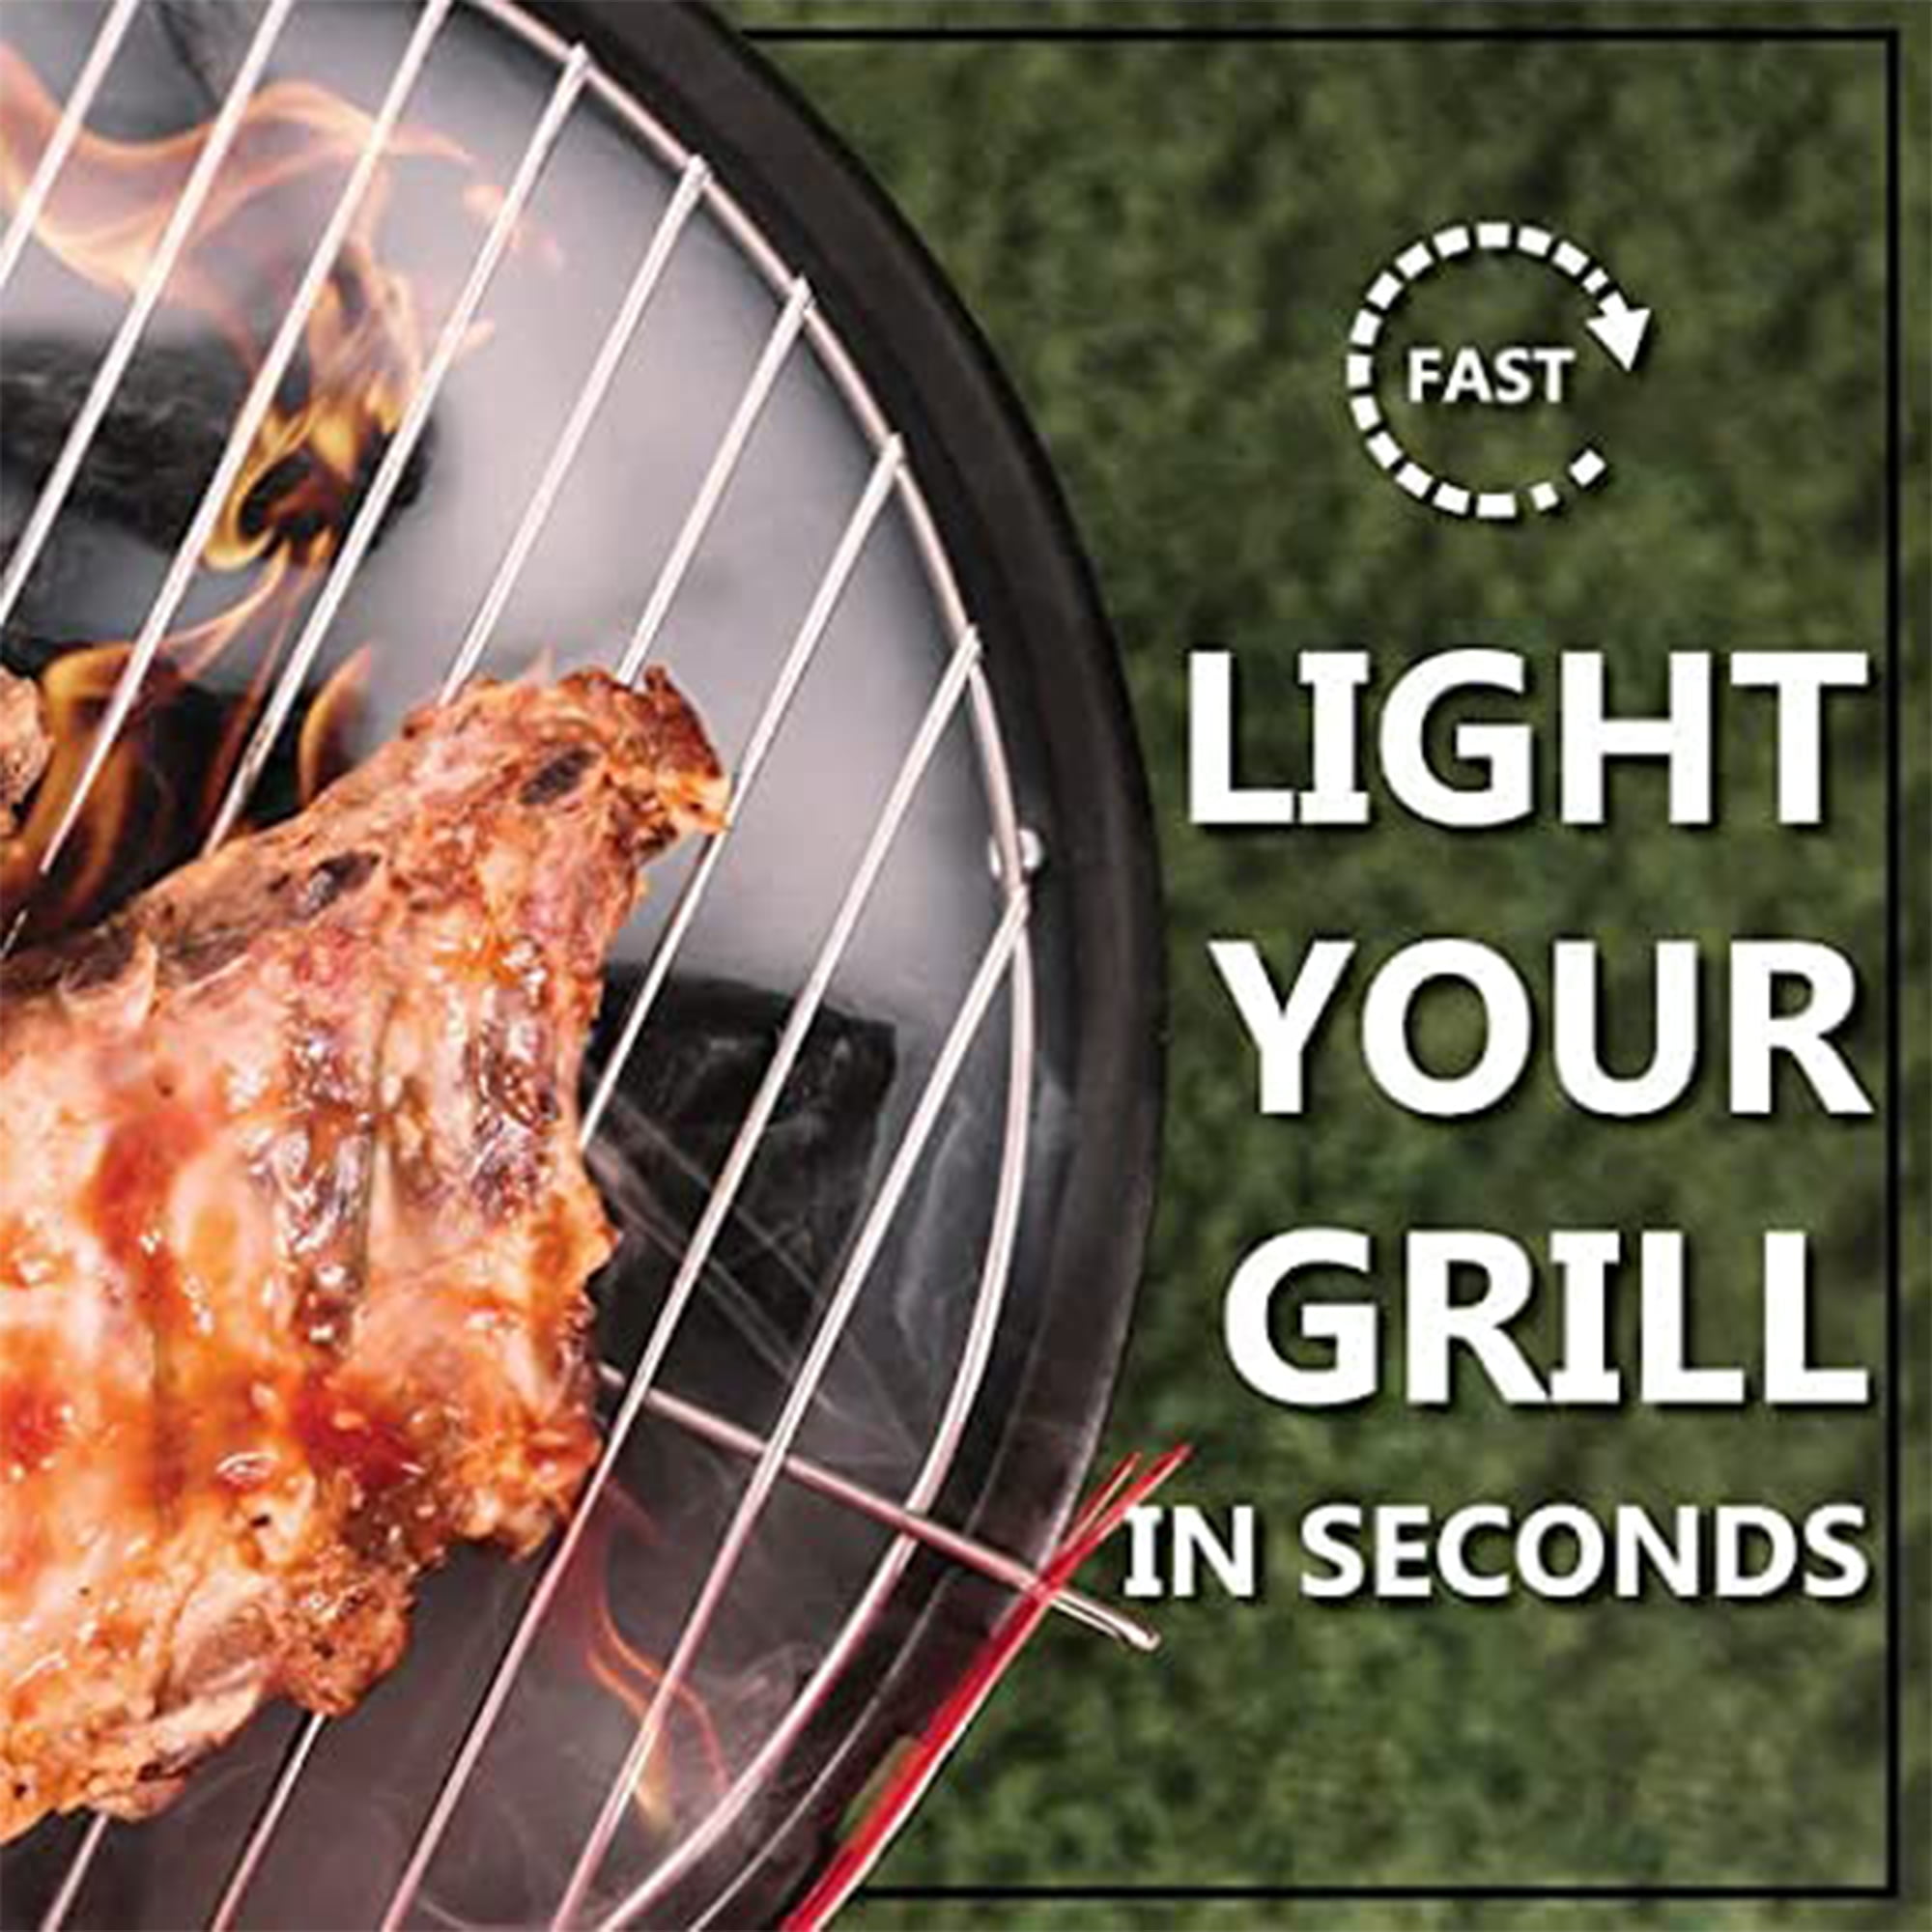 This cool grill torch is the barbecue accessory you need » Gadget Flow